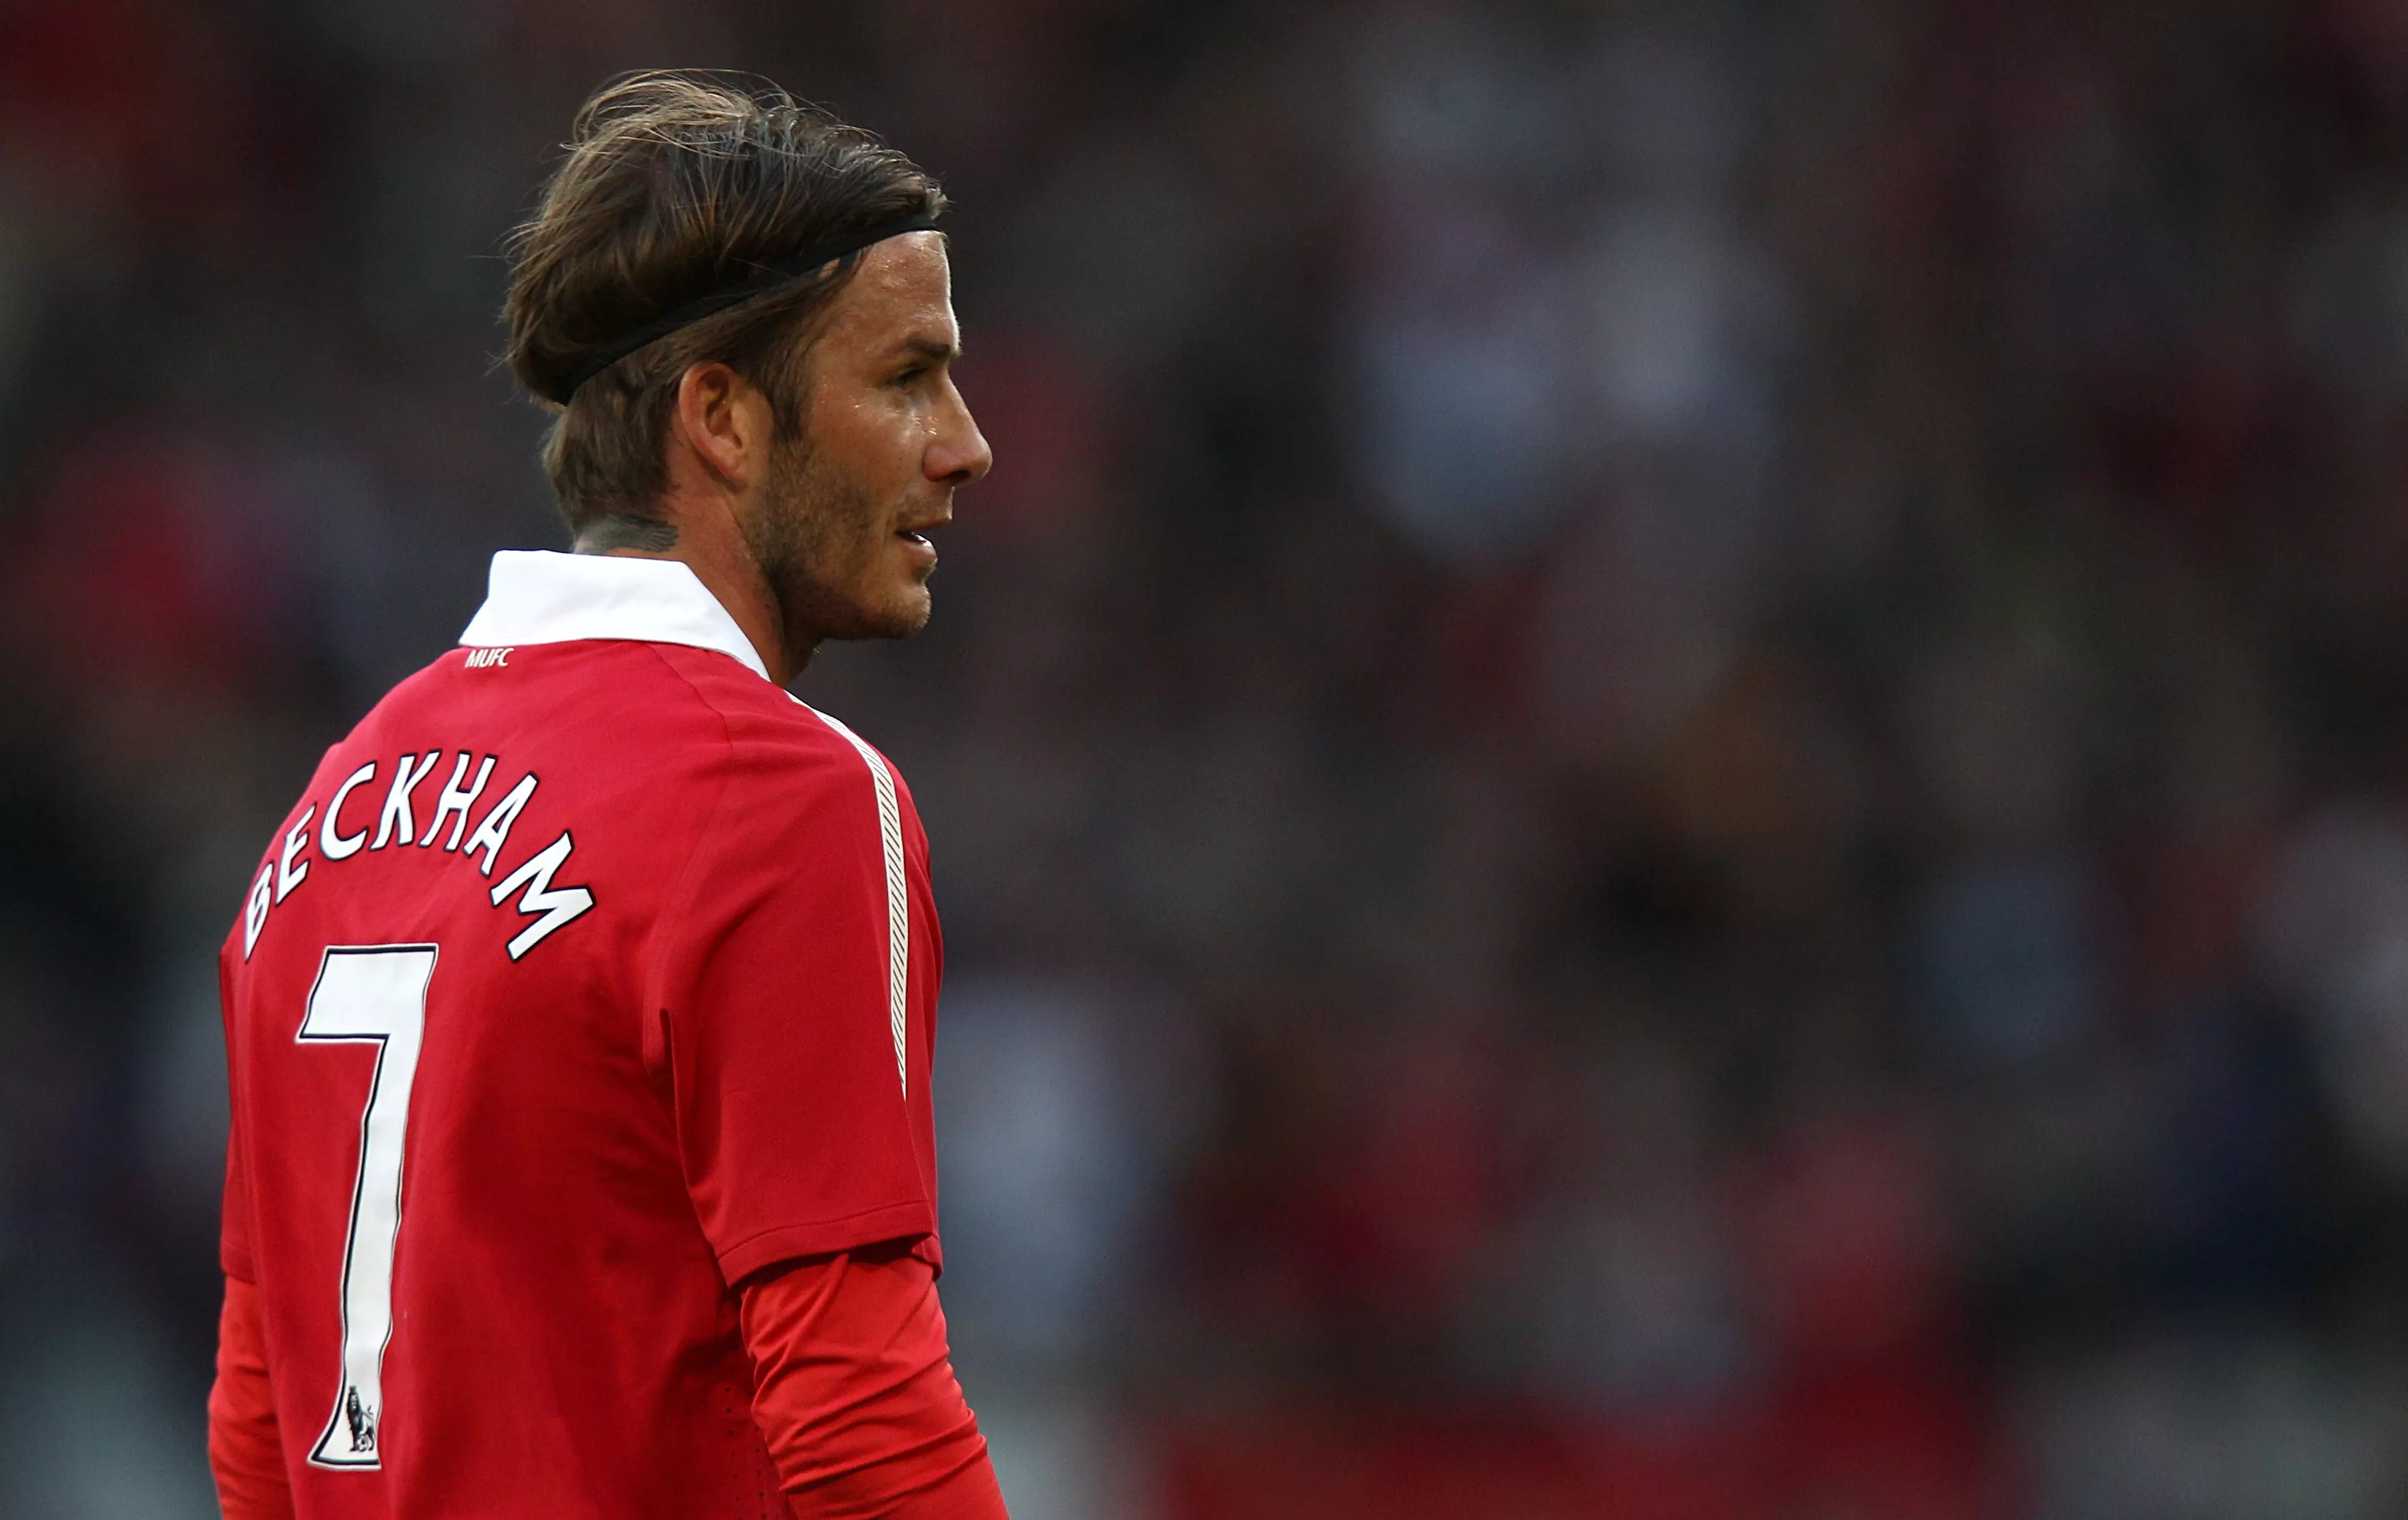 Throwback Picture Shows David Beckham Sporting A Different Team's Shirt